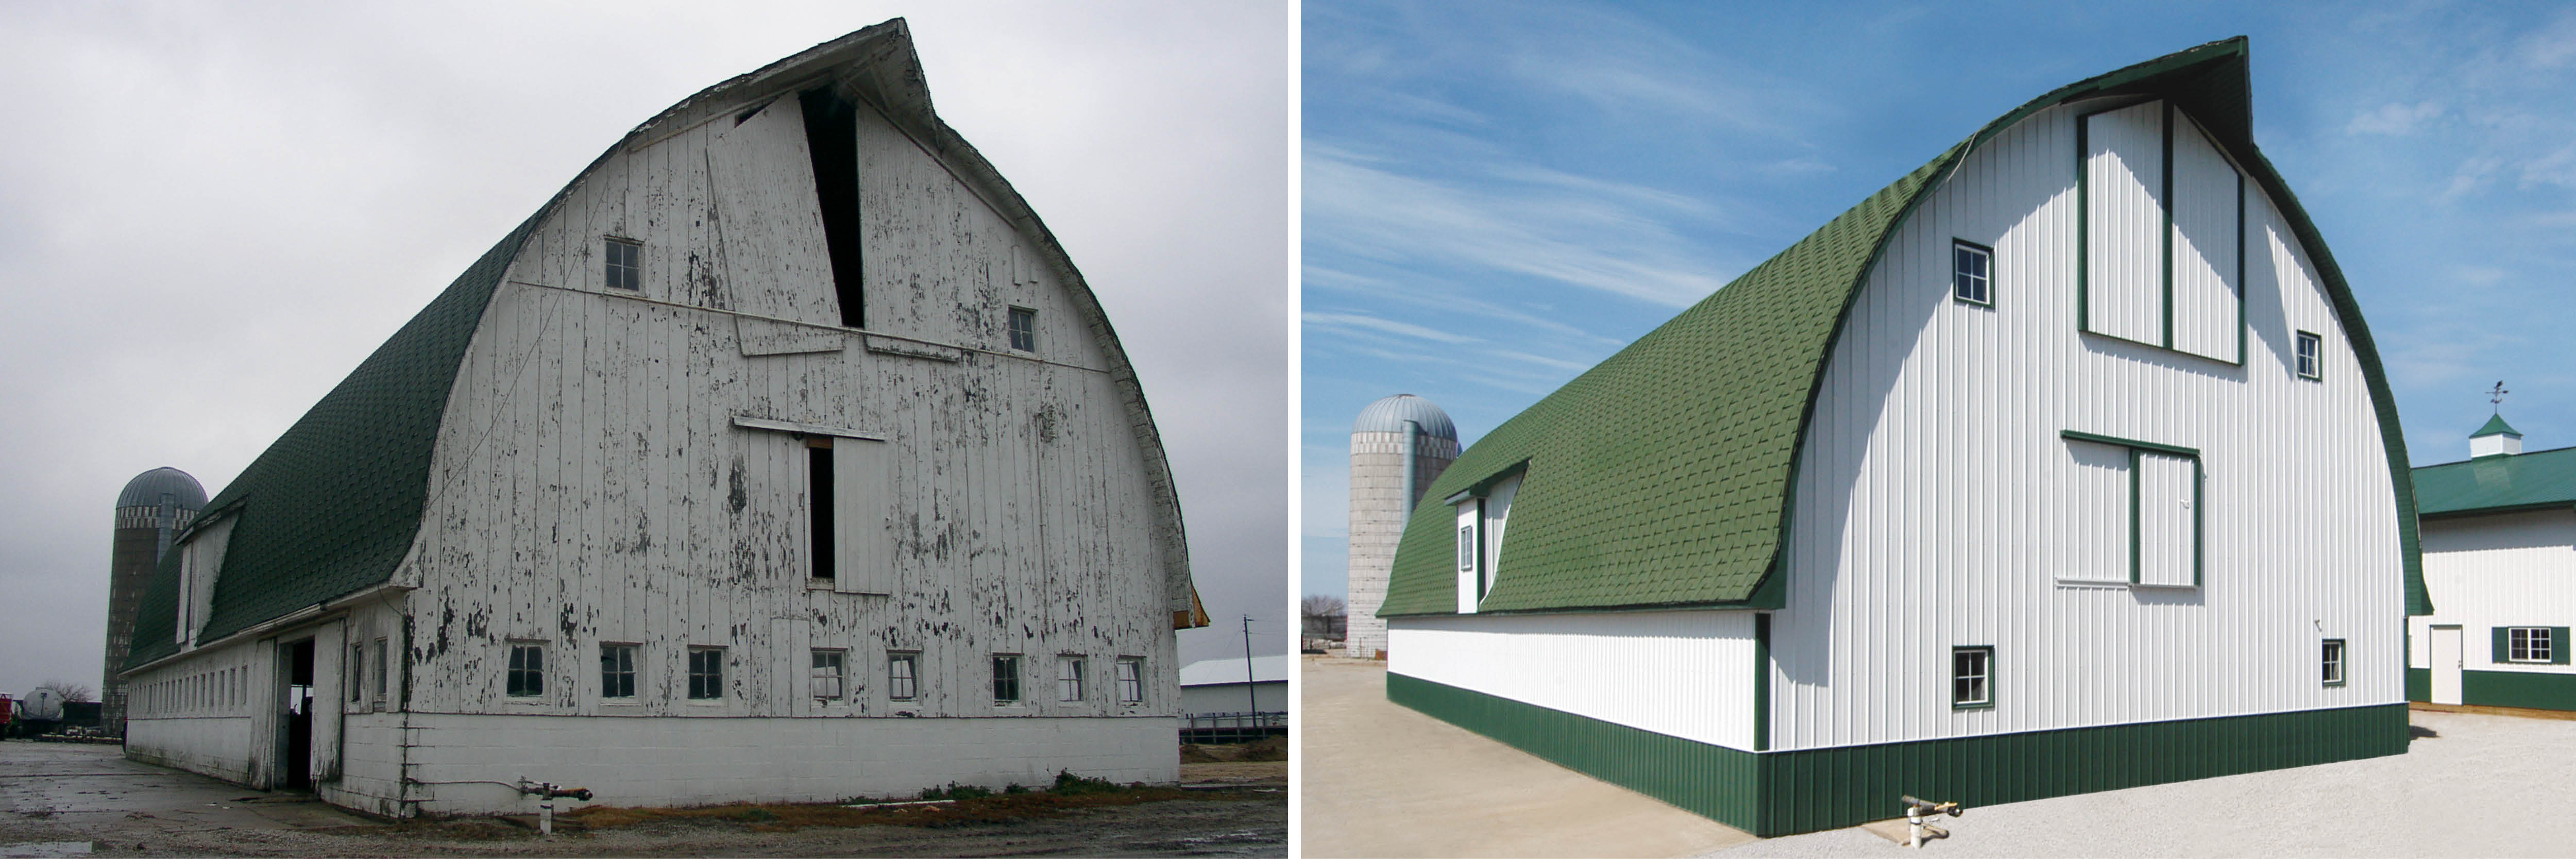 How to Finance Your Pole Barn Renovation Project with Compeer Financial